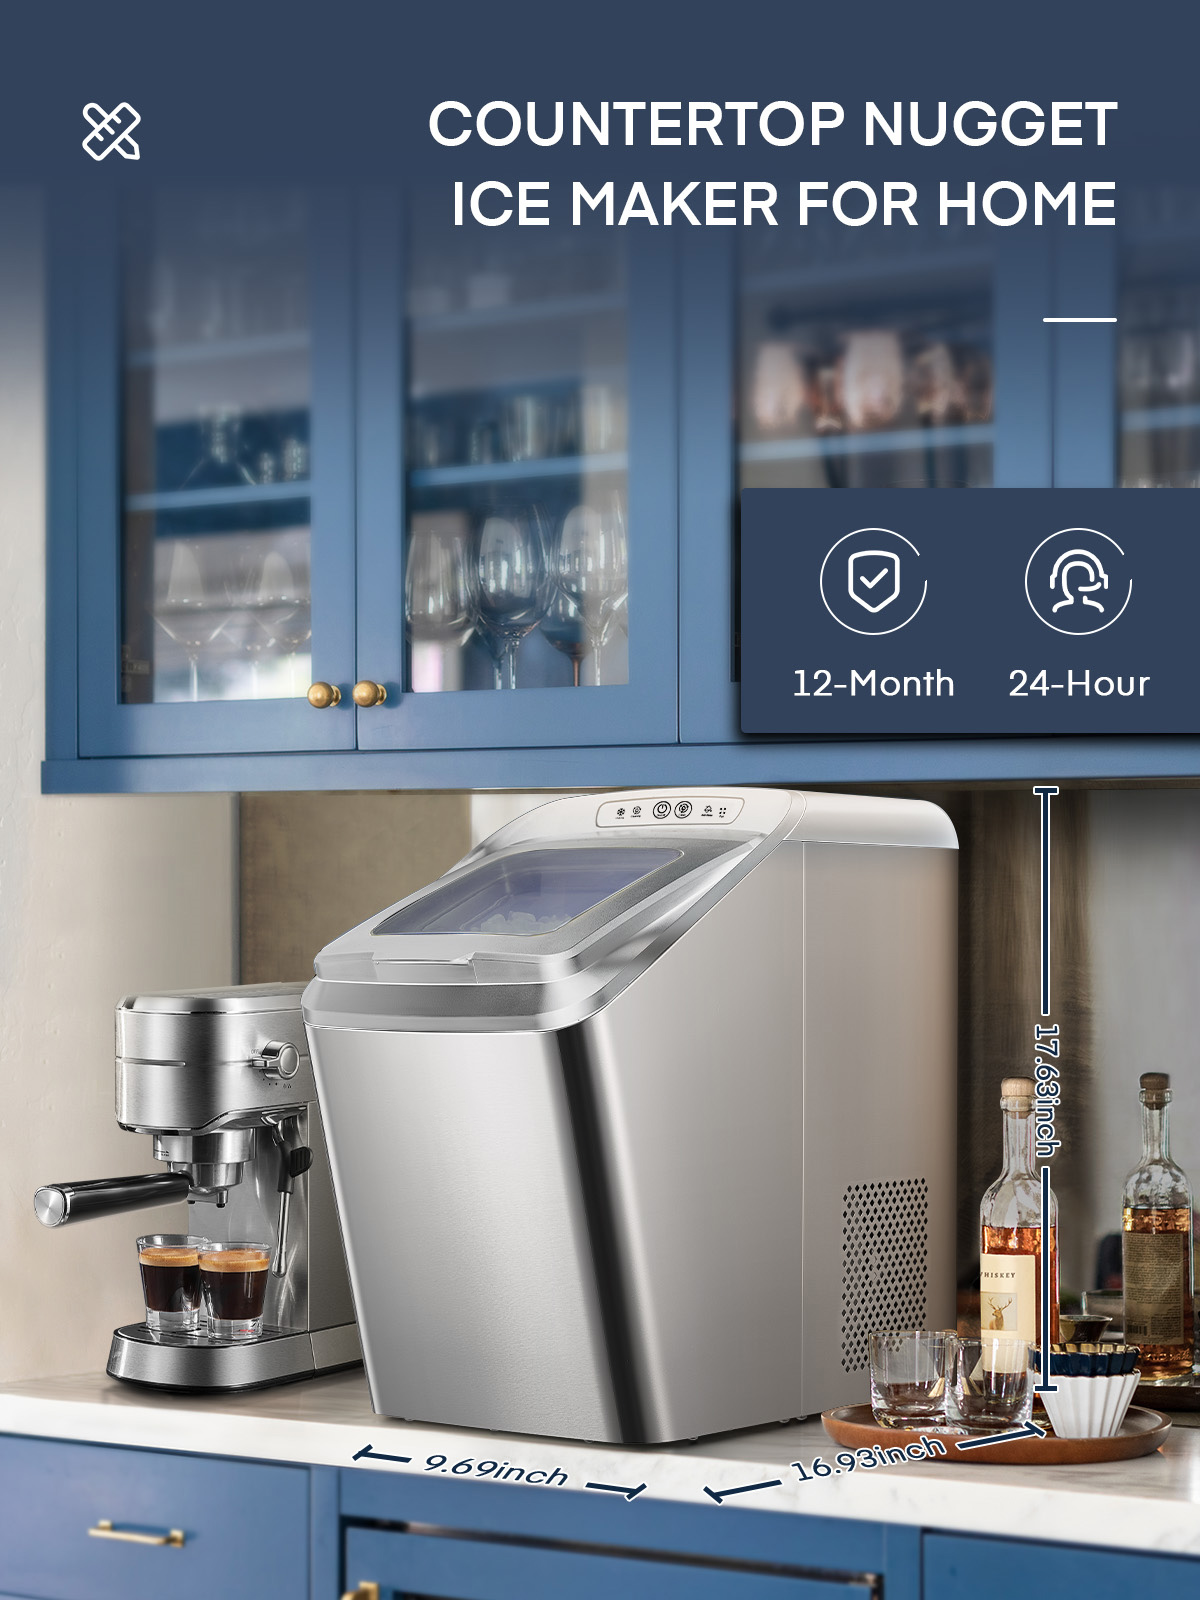 Wamife Nugget Ice Maker Countertop, Portable Self-Cleaning Pellet